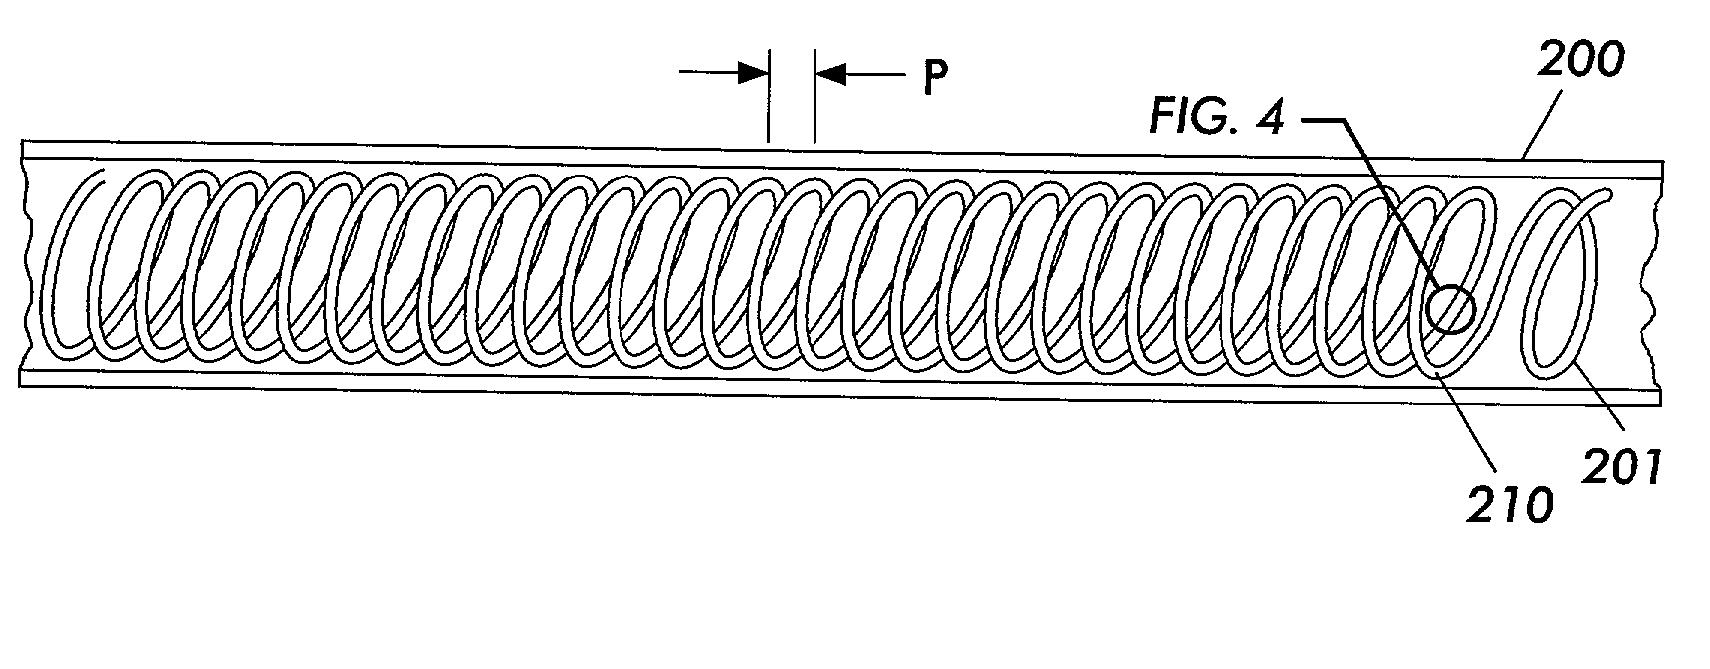 Auger for magnetic materials with specific use for developer transport in electrographic printing systems